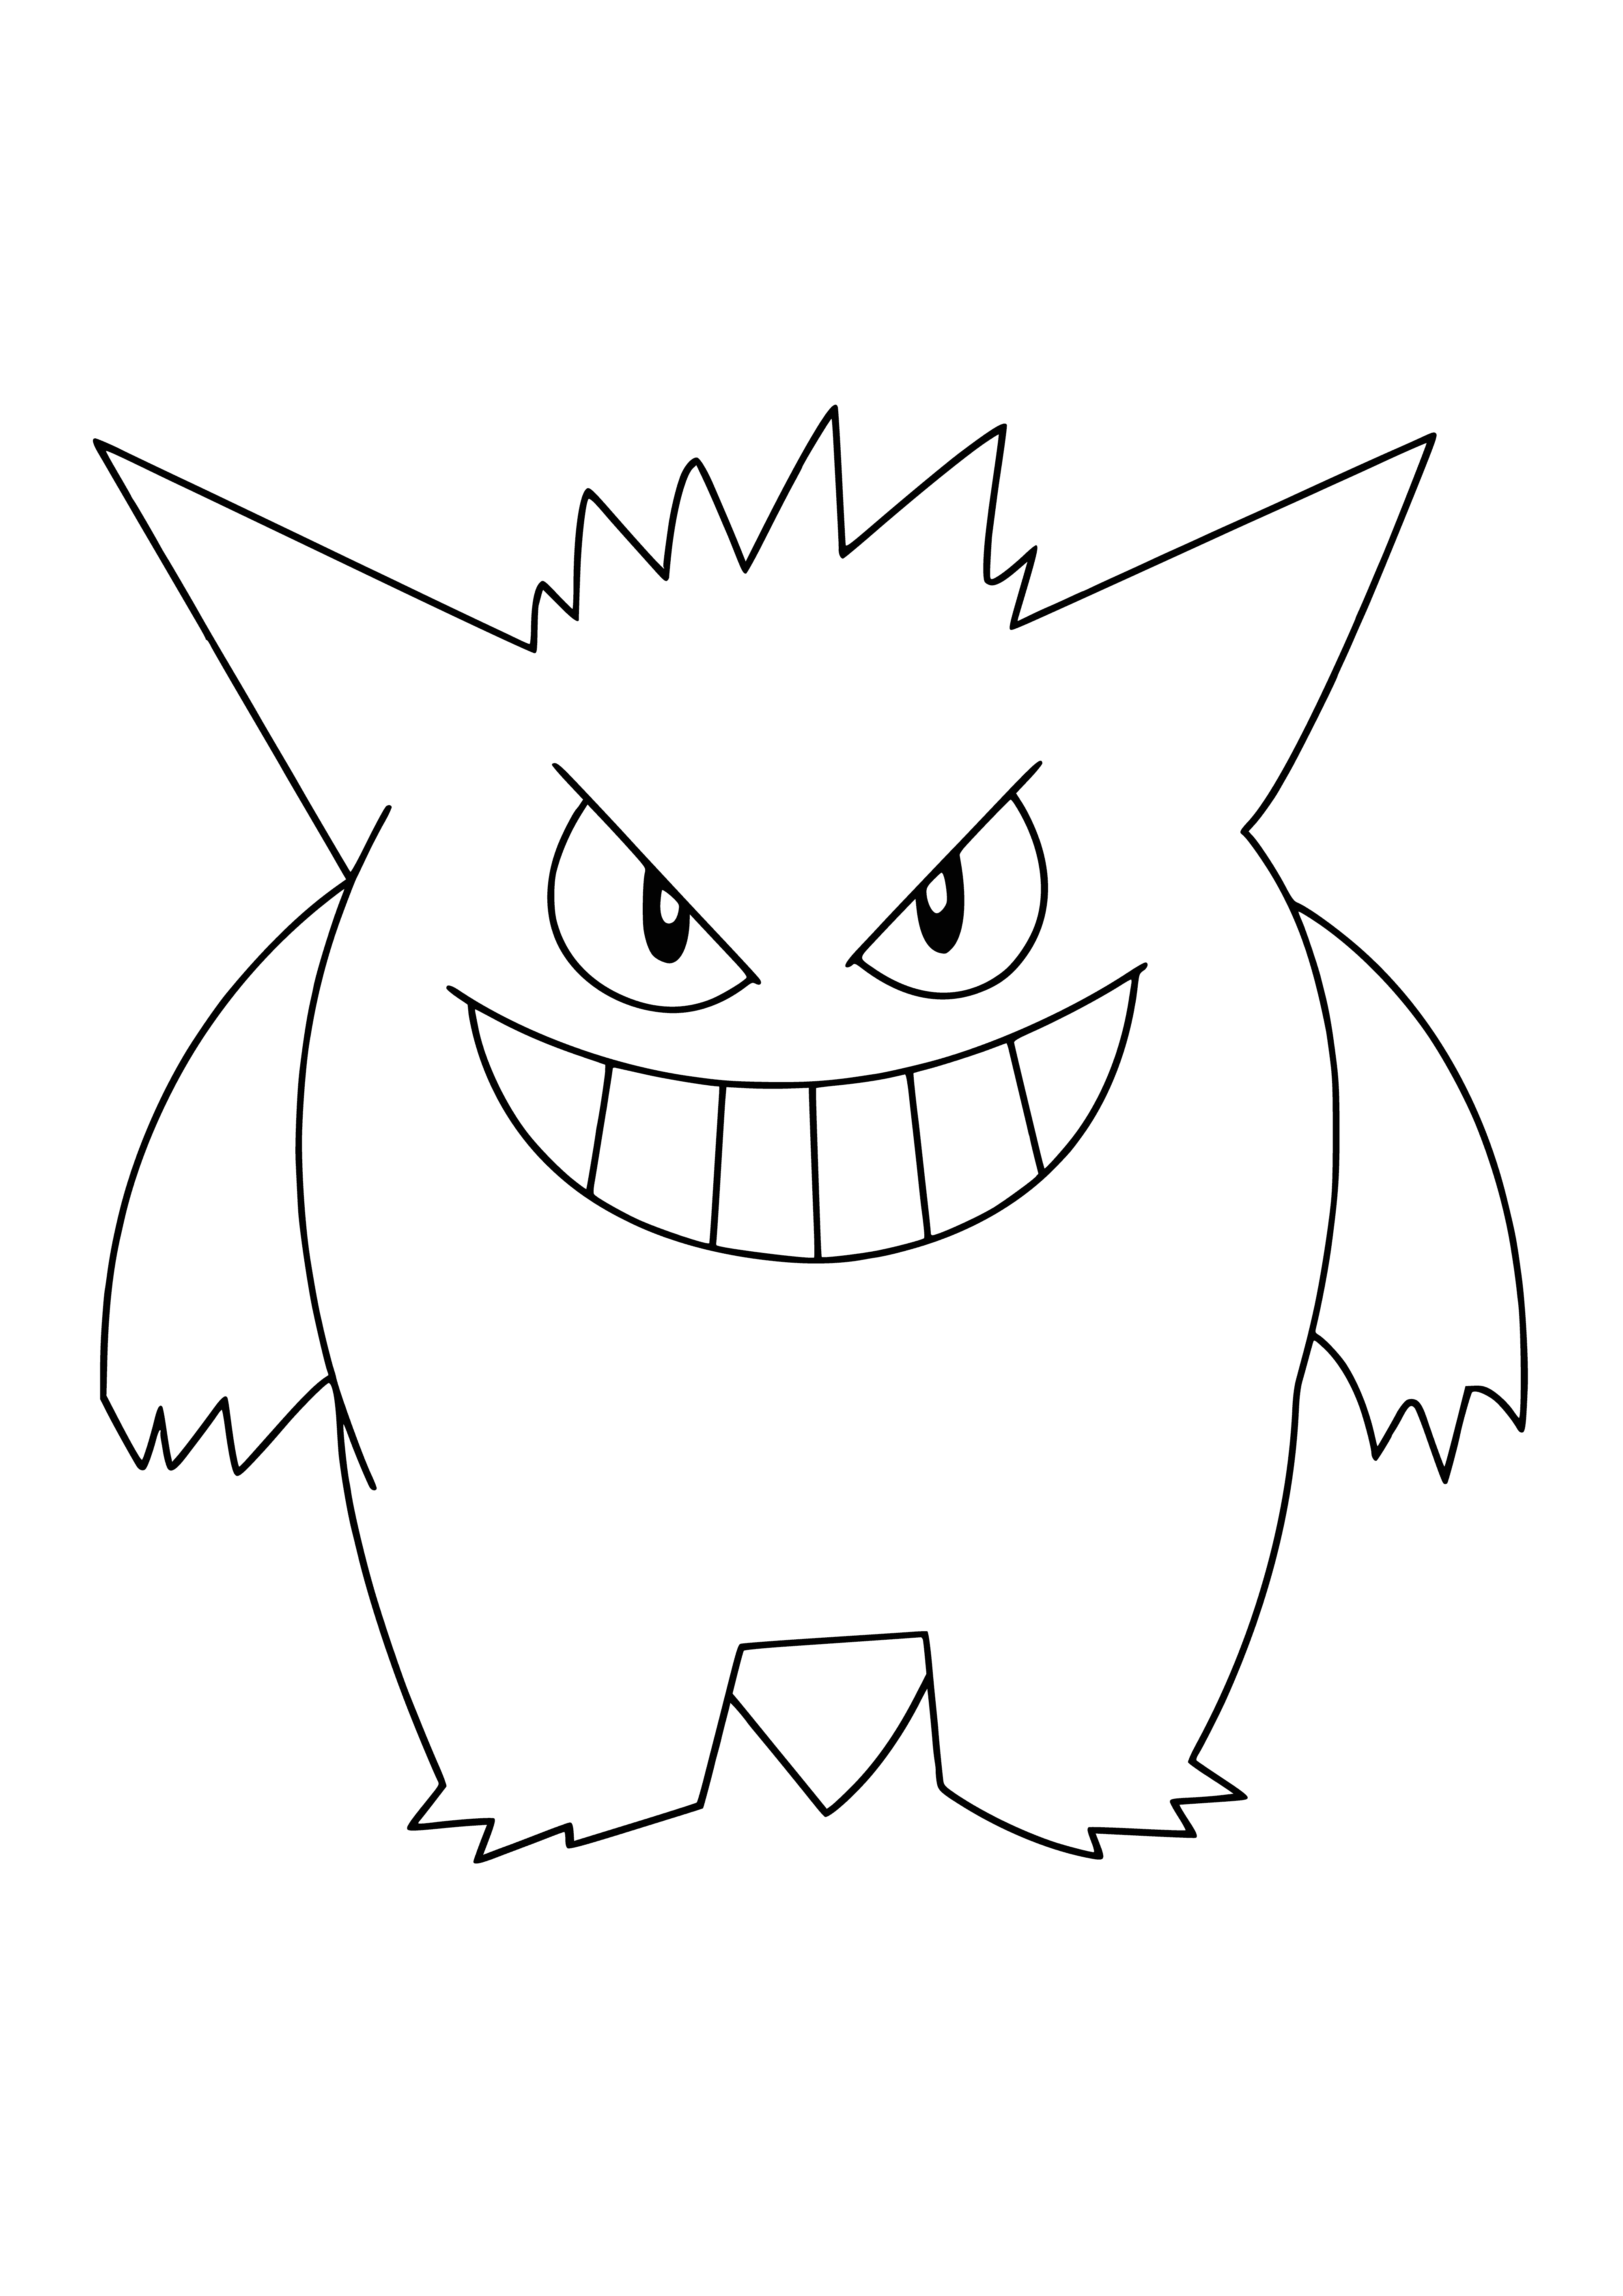 coloring page: Black, amorphous Pokémon w/ red eyes, wide mouth, jagged teeth, & 3 claws on each hand.